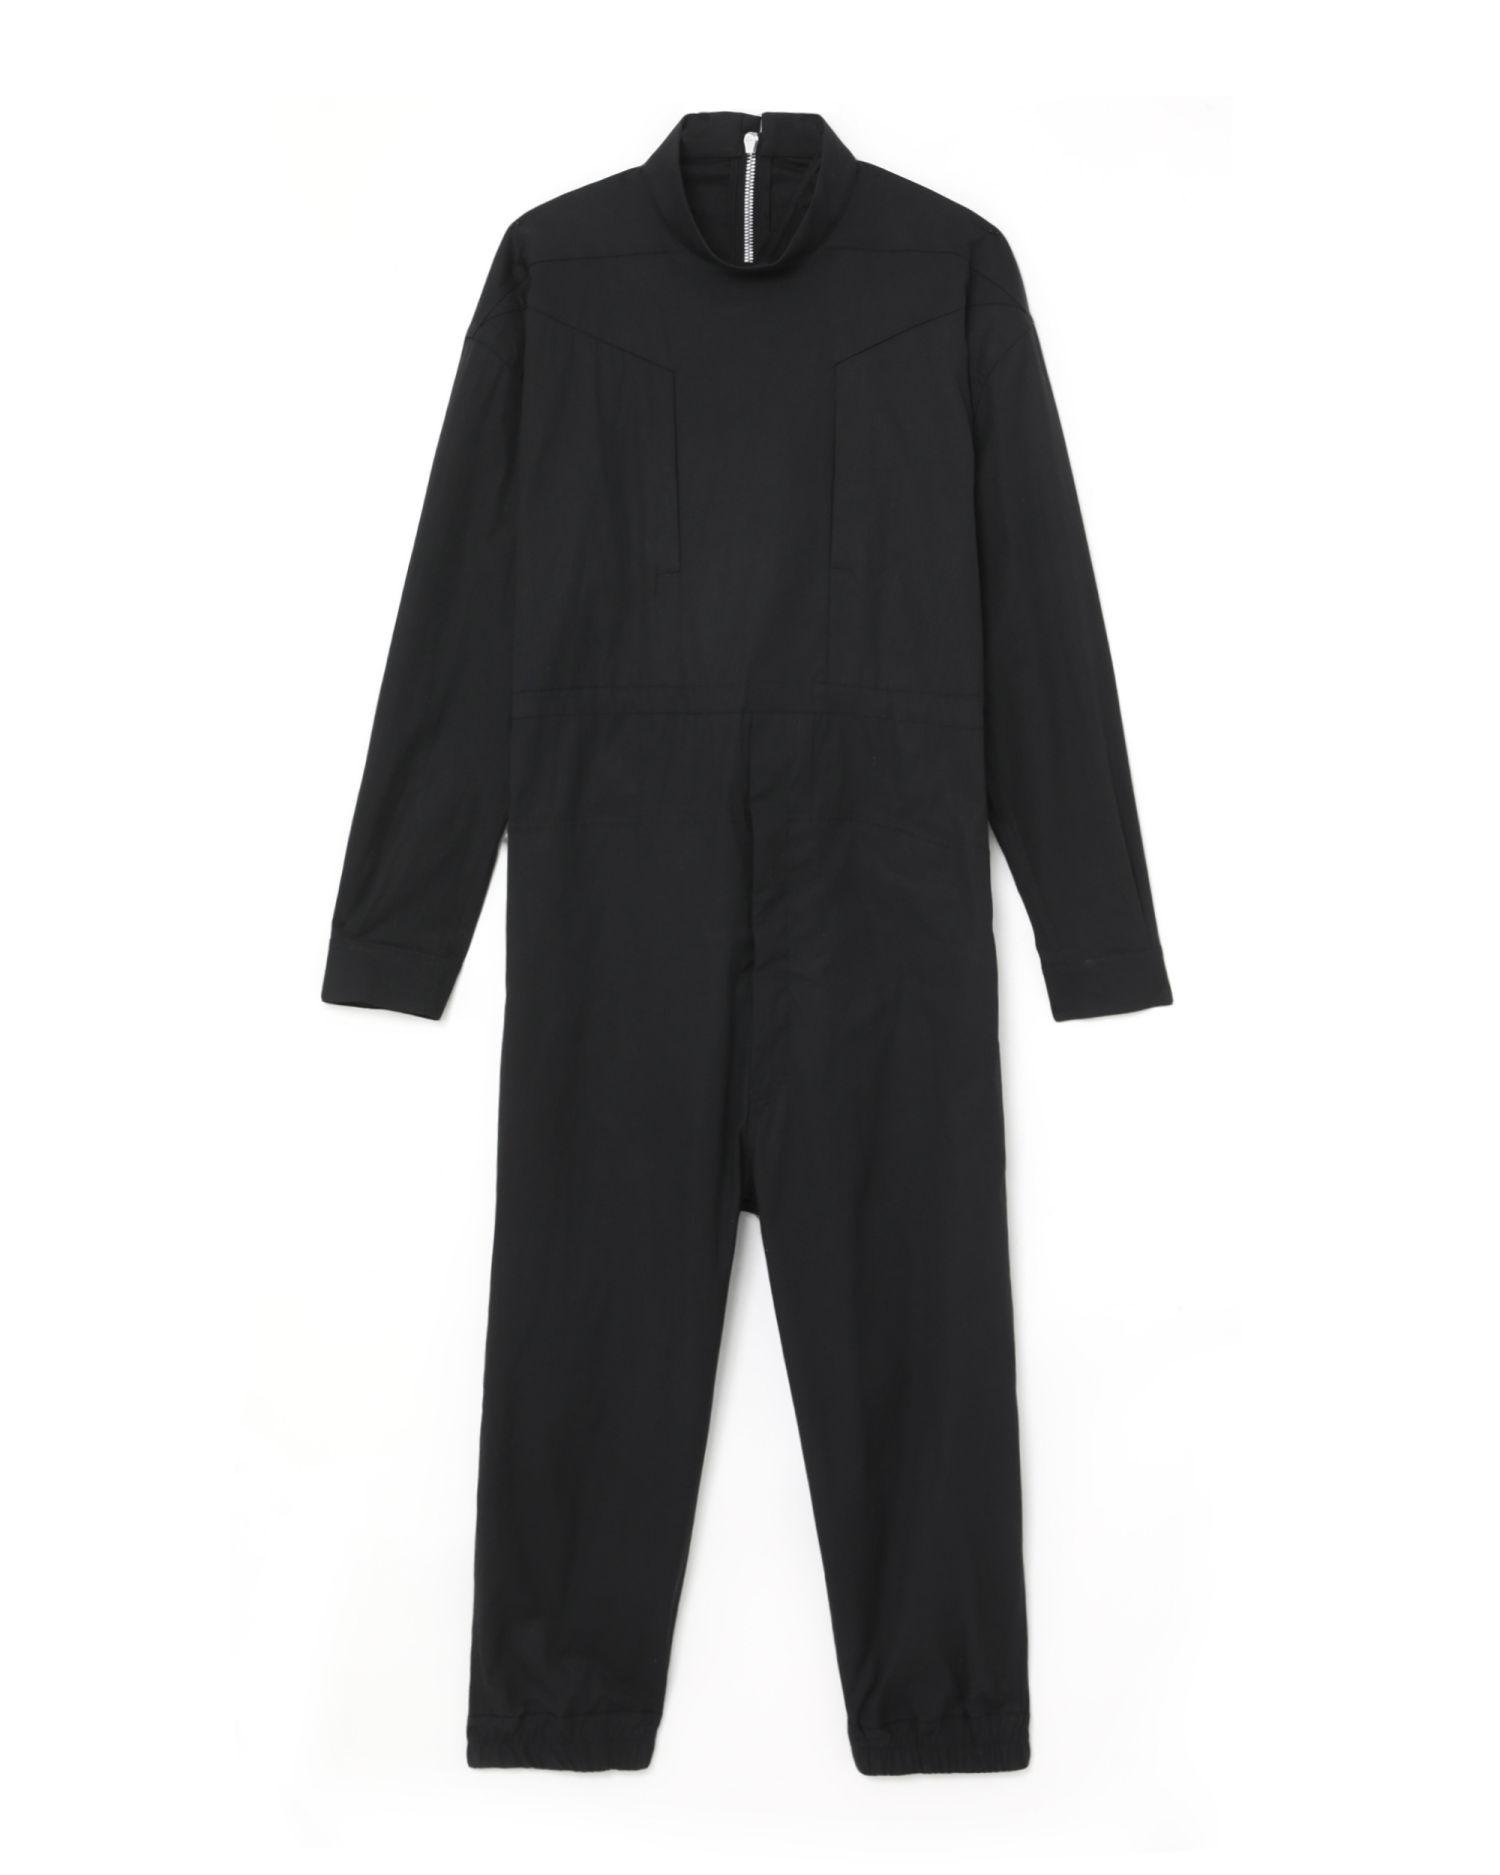 Tommy flight suit by RICK OWENS